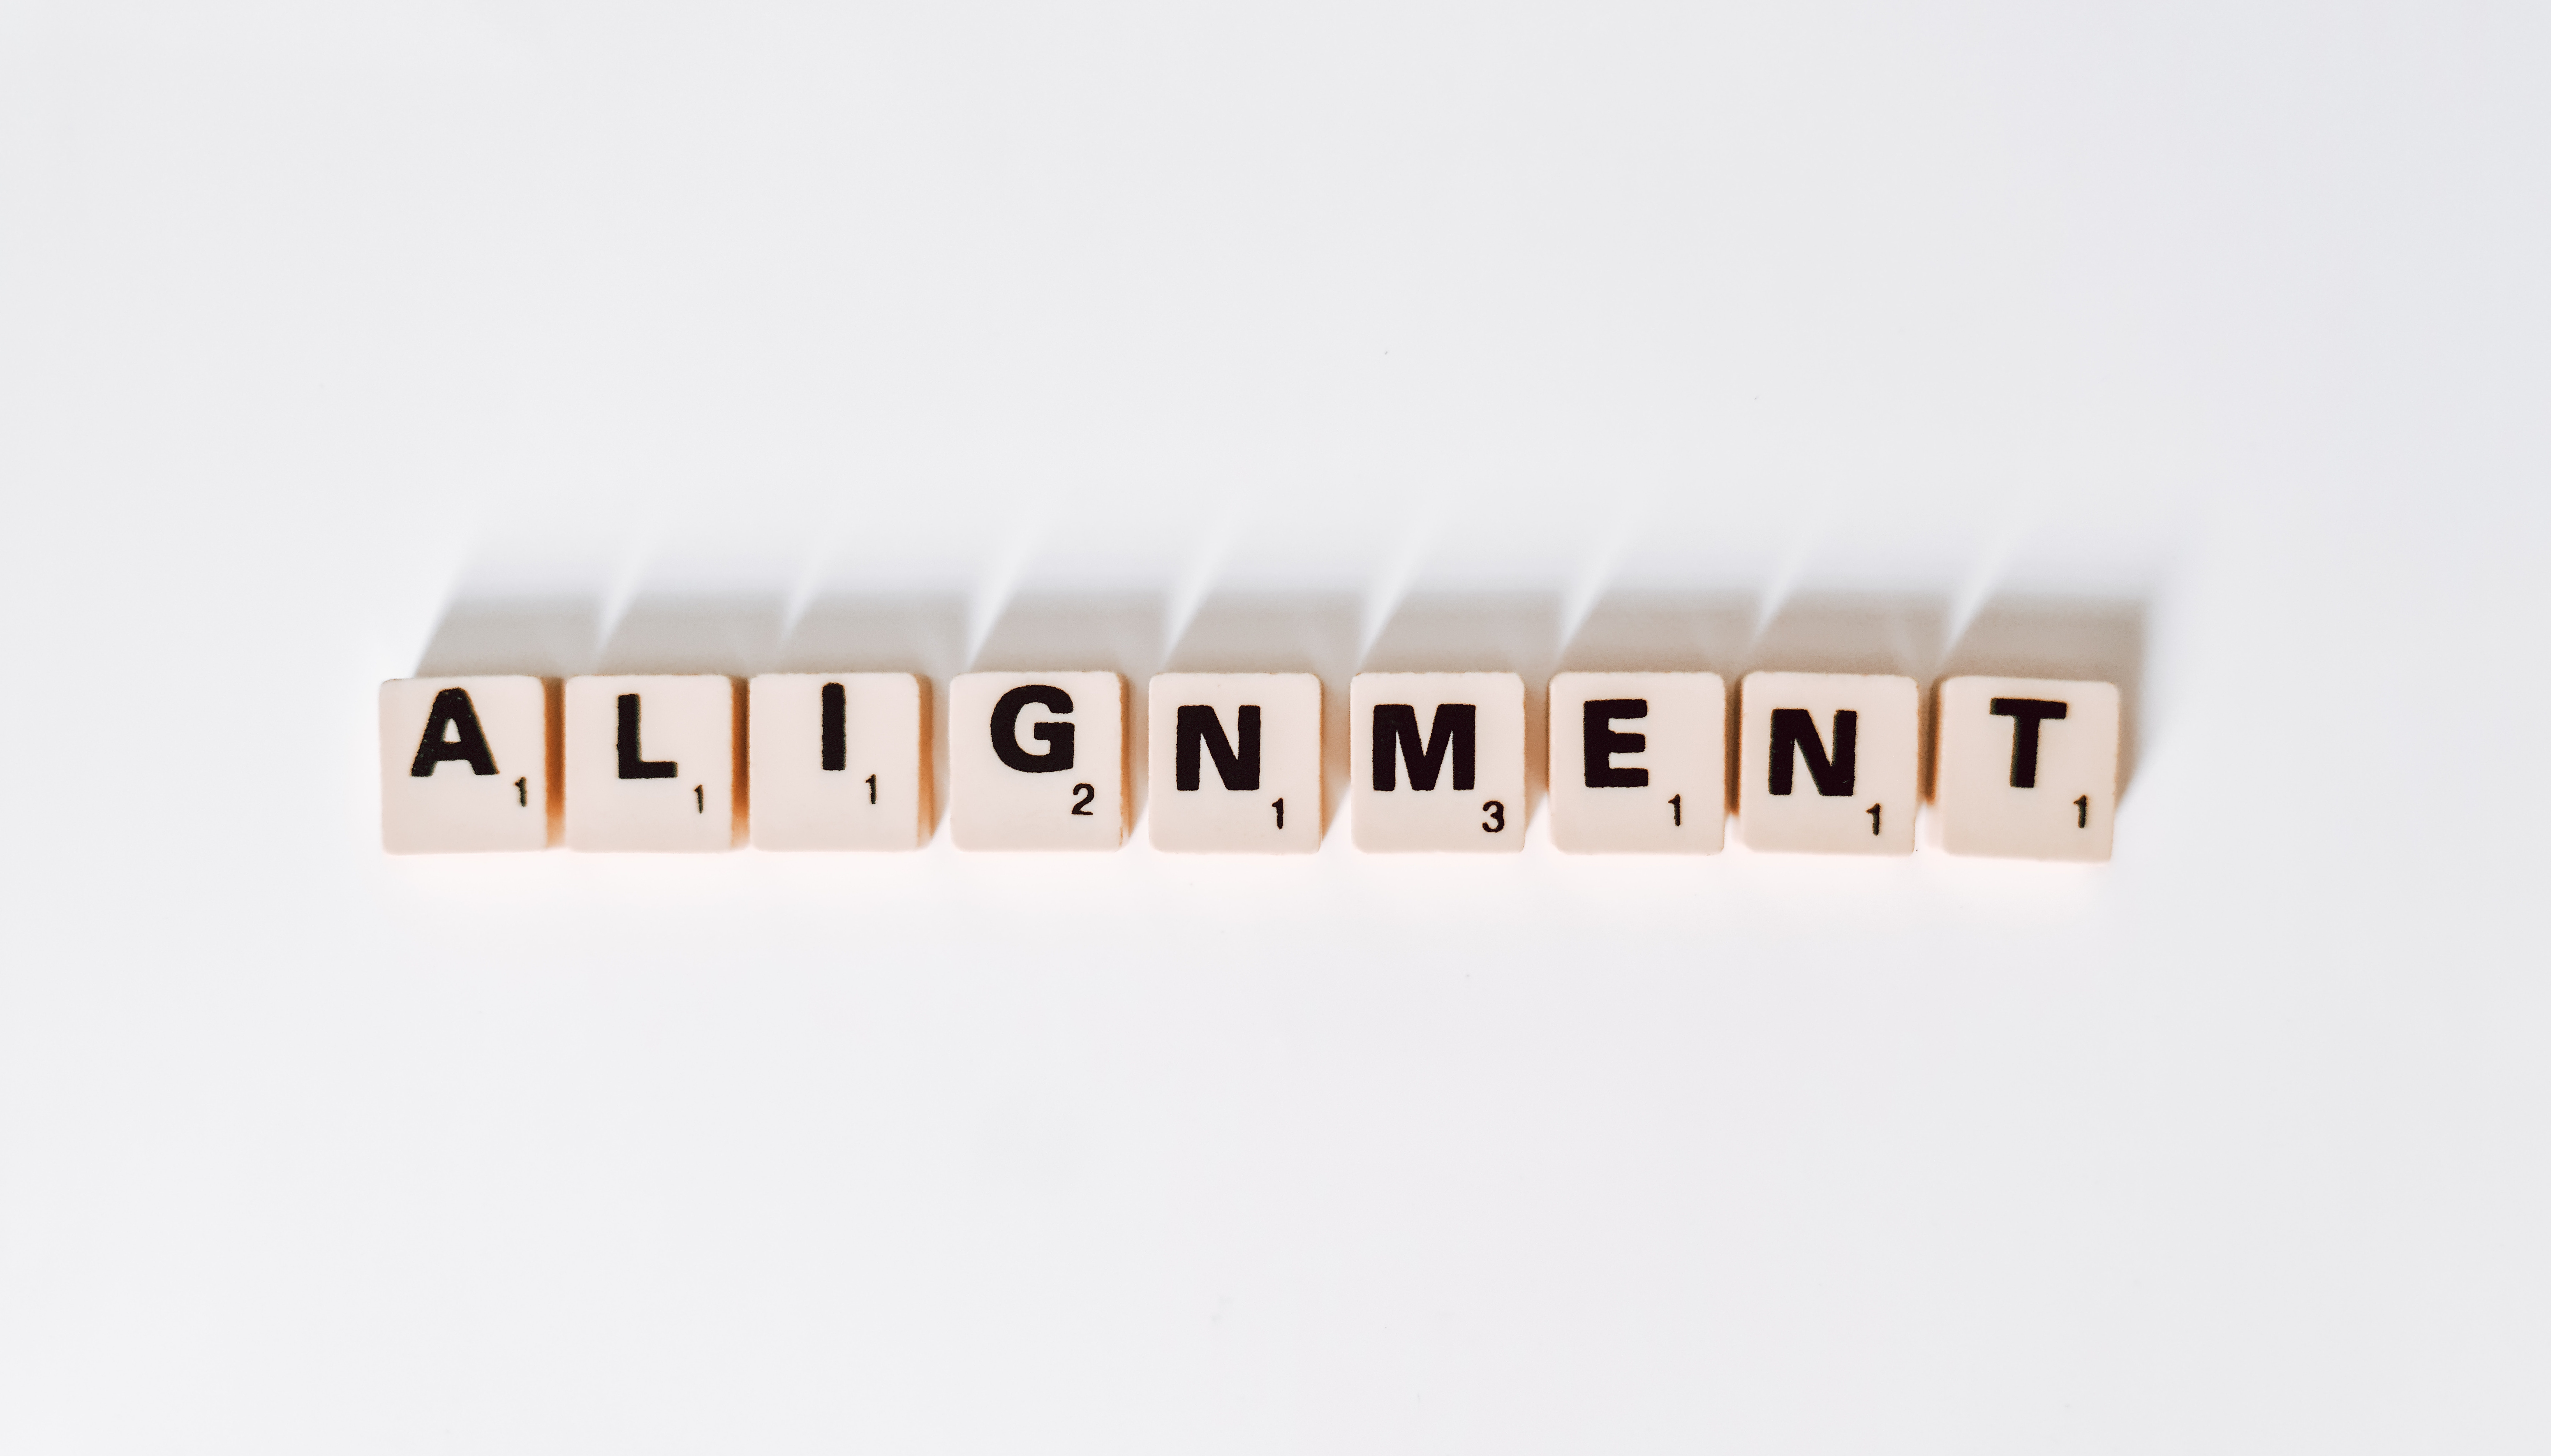 The word "alignment" spelled out with pieces from a Scrabble board game. 